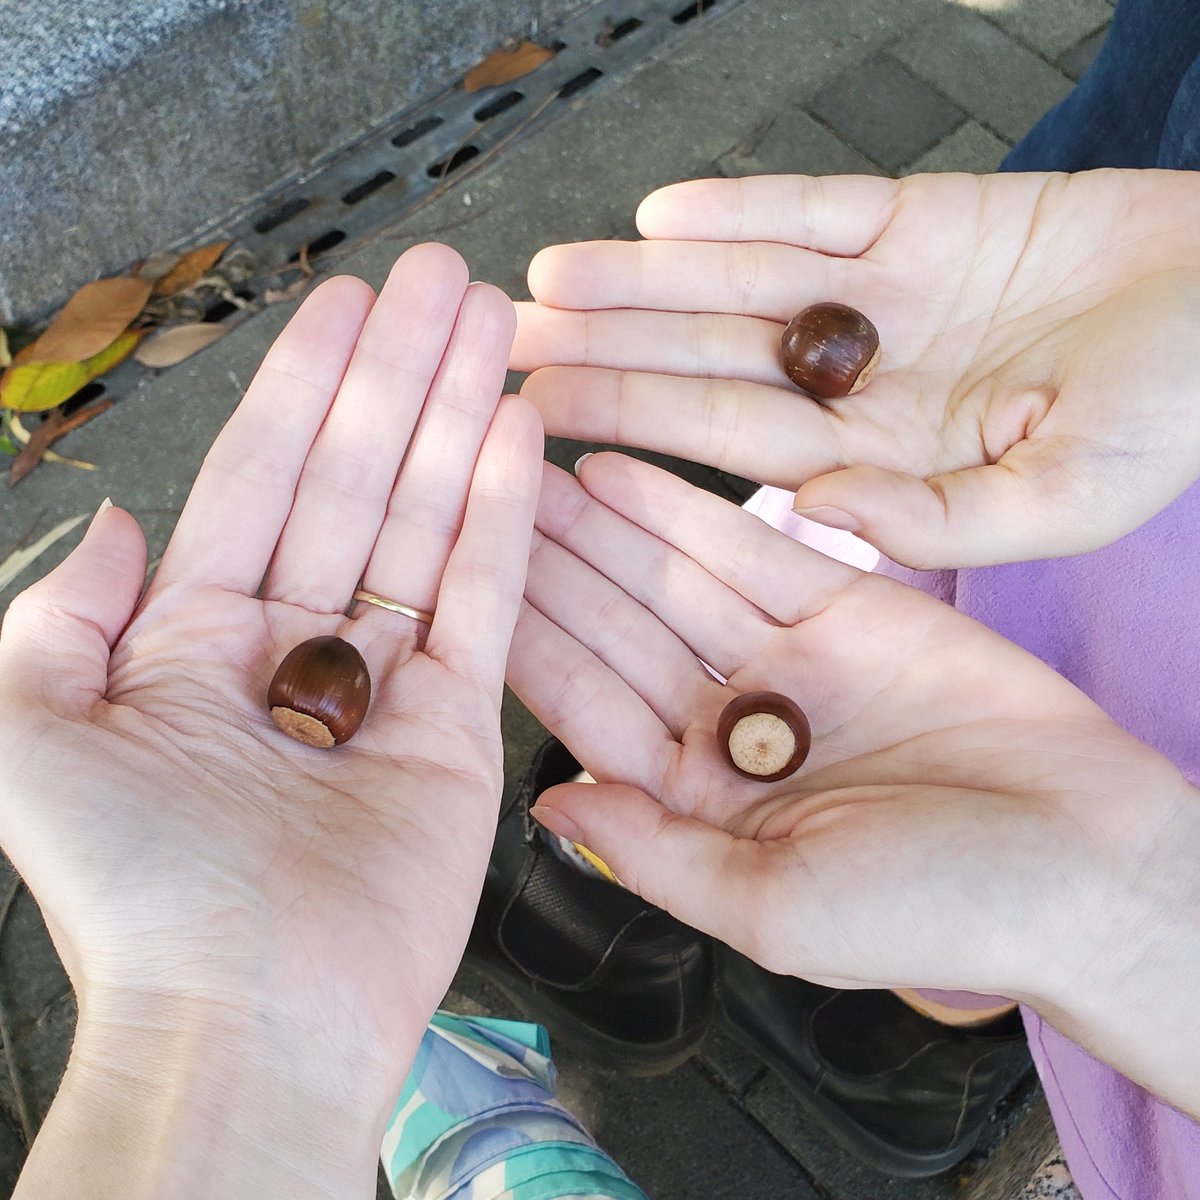 different types of acorns, as he reached into another pocket and pulled out even more acorns, these longer, more yellow."What do you do with them?" I asked."I give them to children" he said, and handed us each an acorn. He thanked us and walked away, back into the trees.